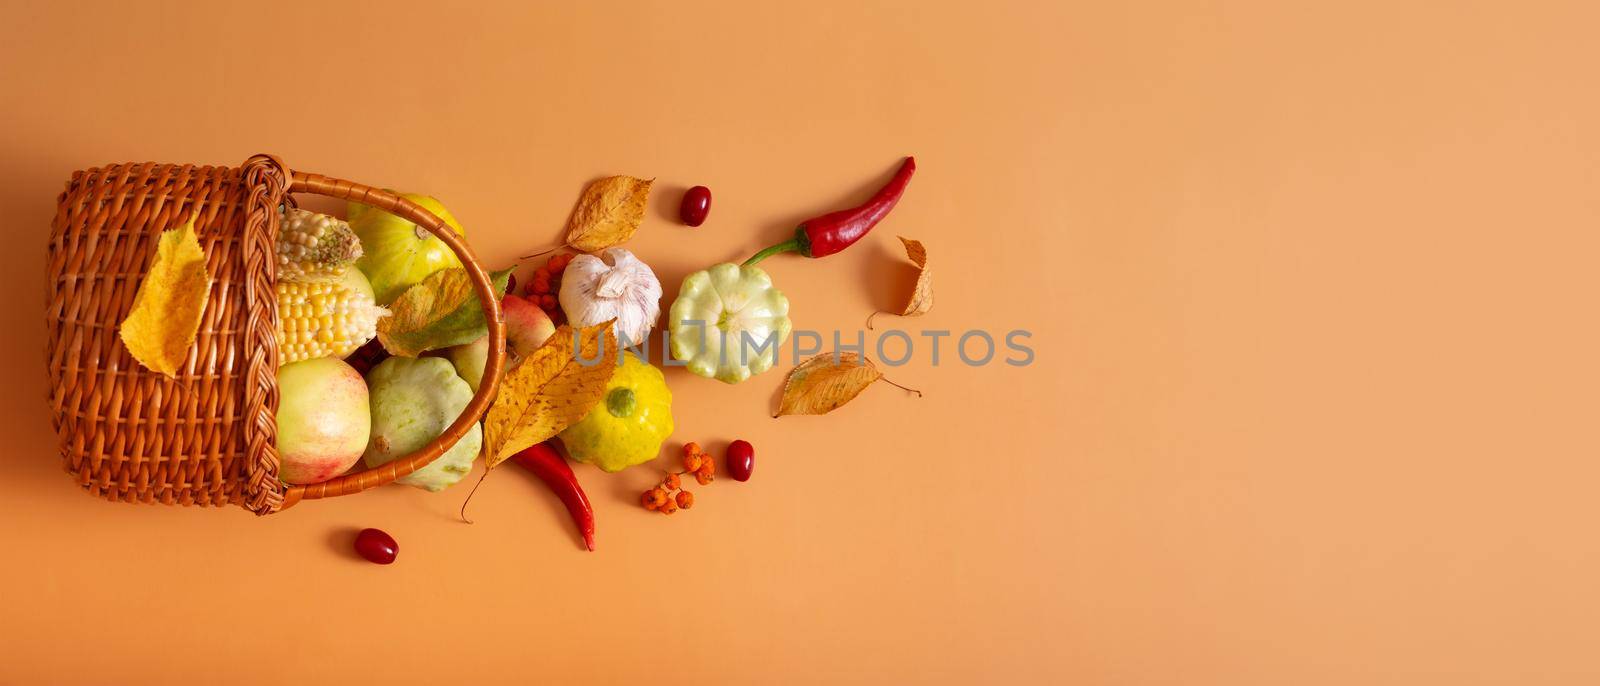 Autumn banner with harvest basket with corn, apples, zucchini and peppers on a orange background by ssvimaliss